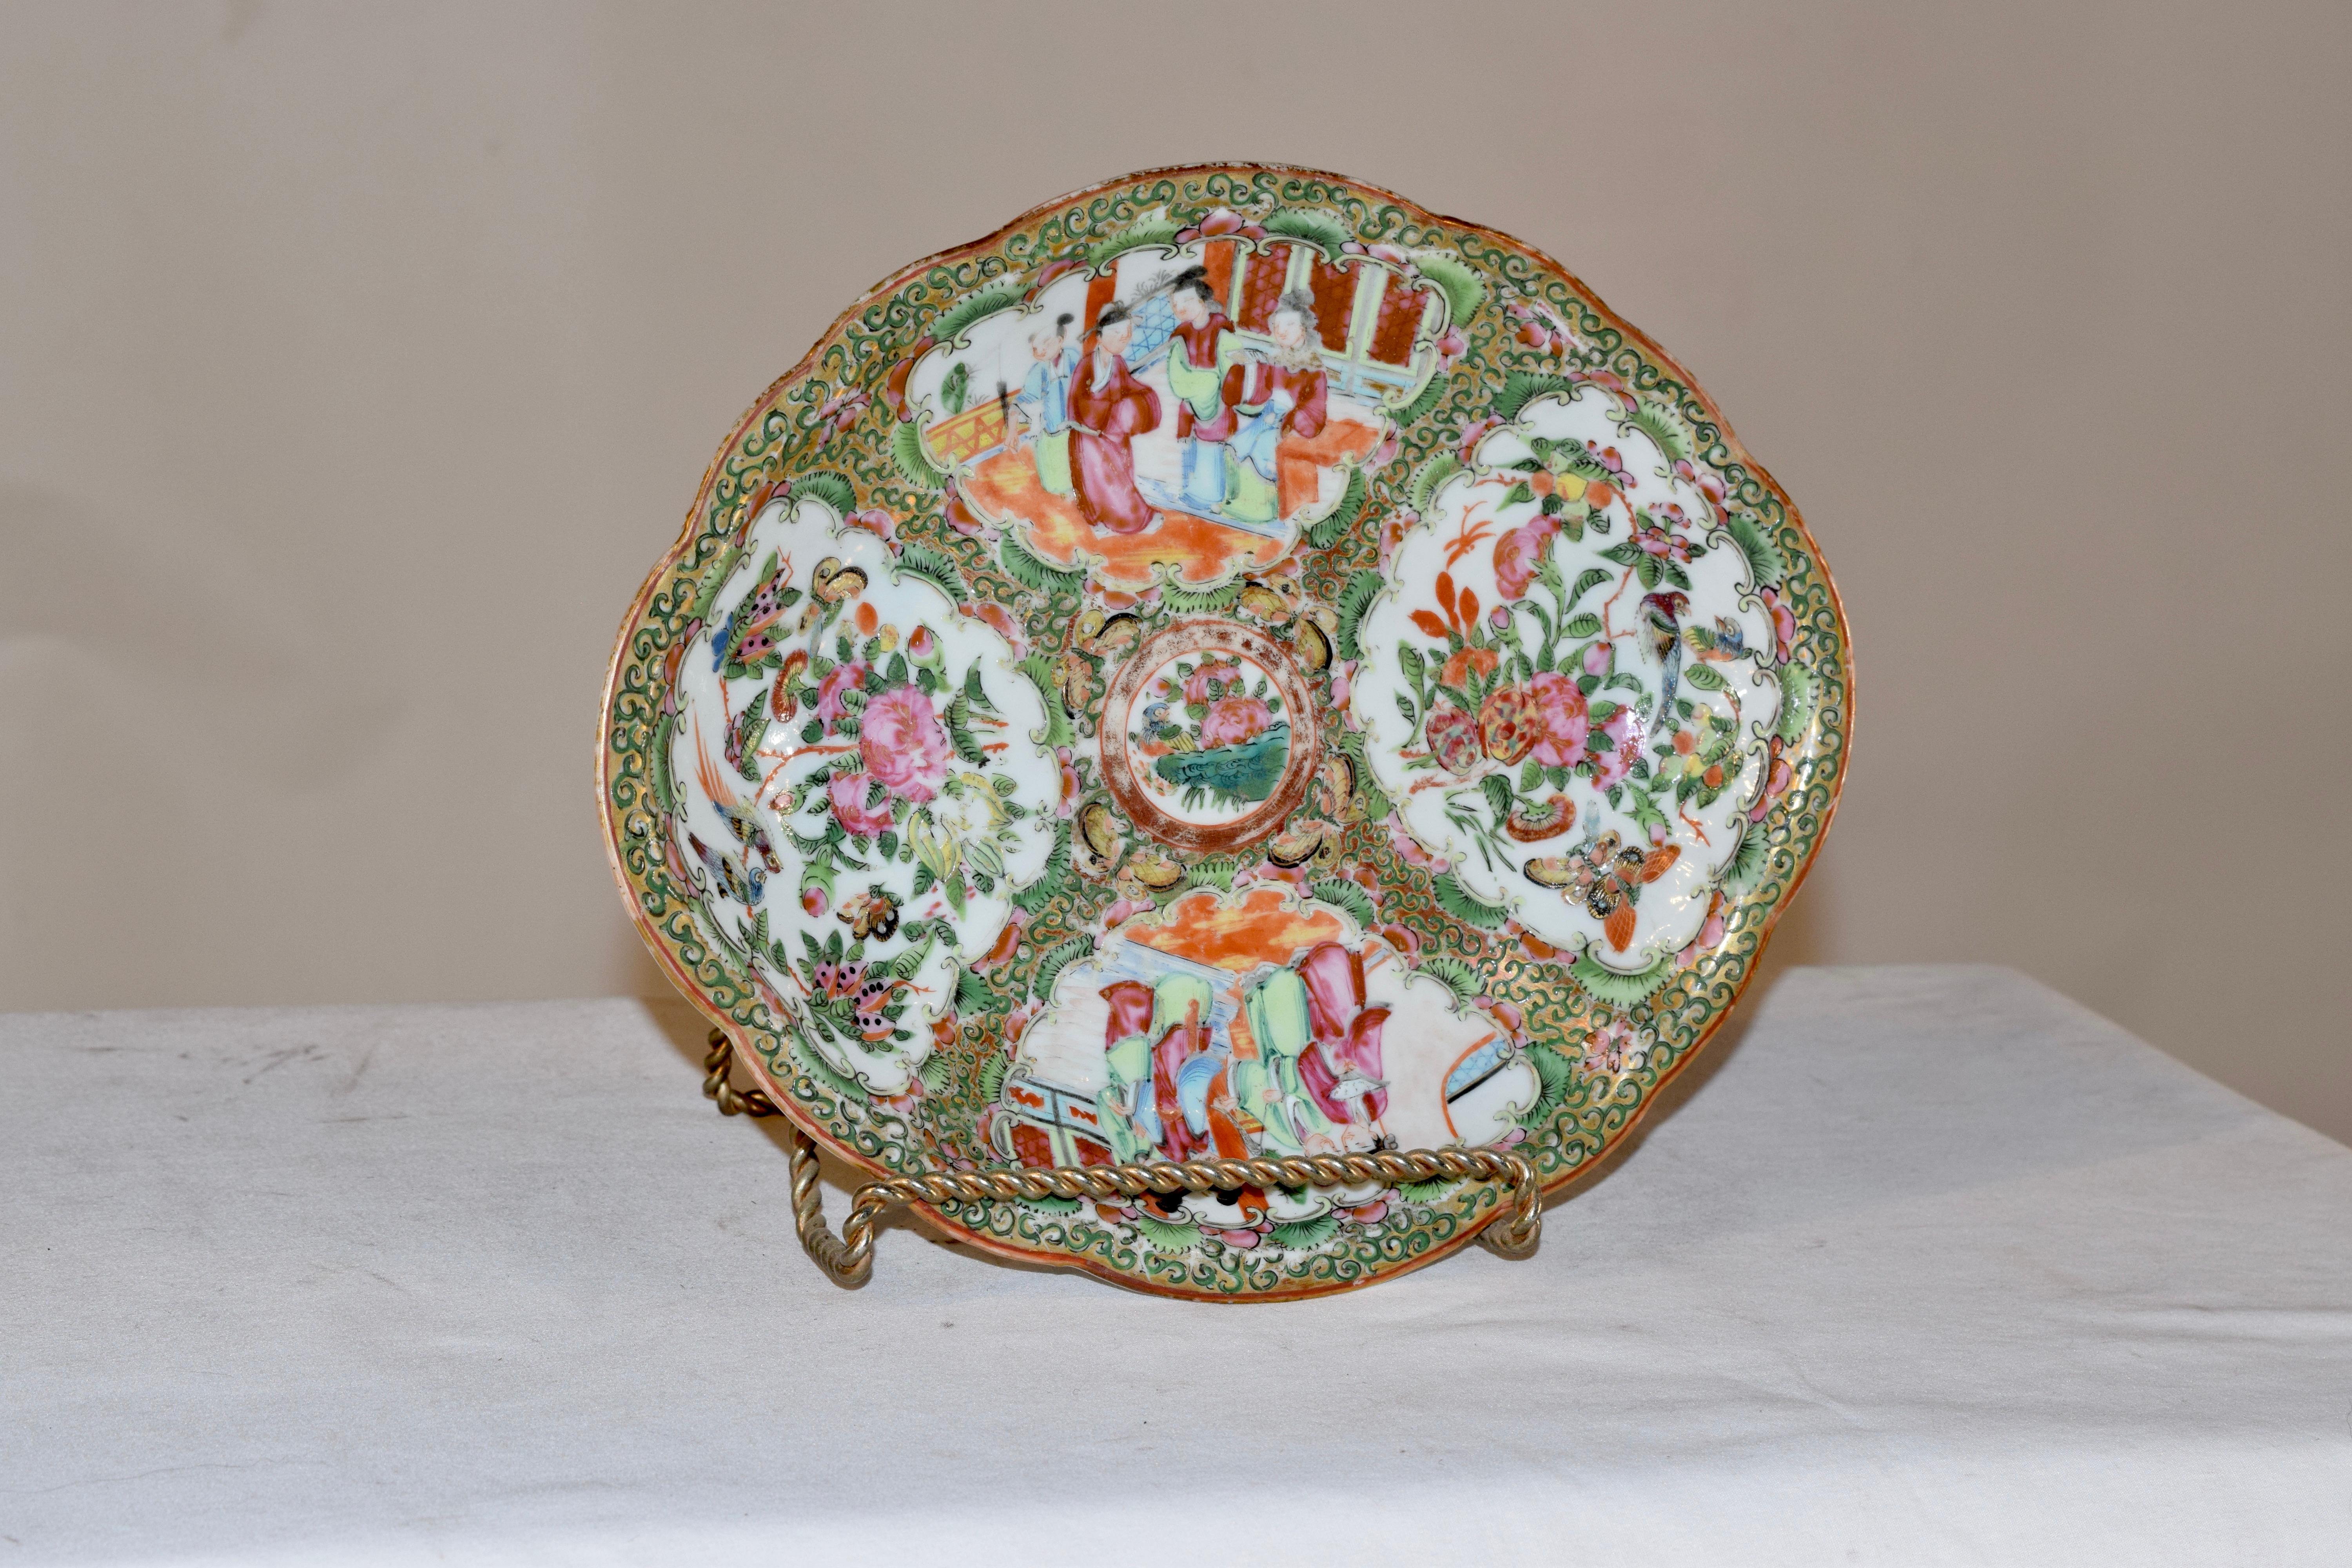 19th century shaped dish in the highly collectible 